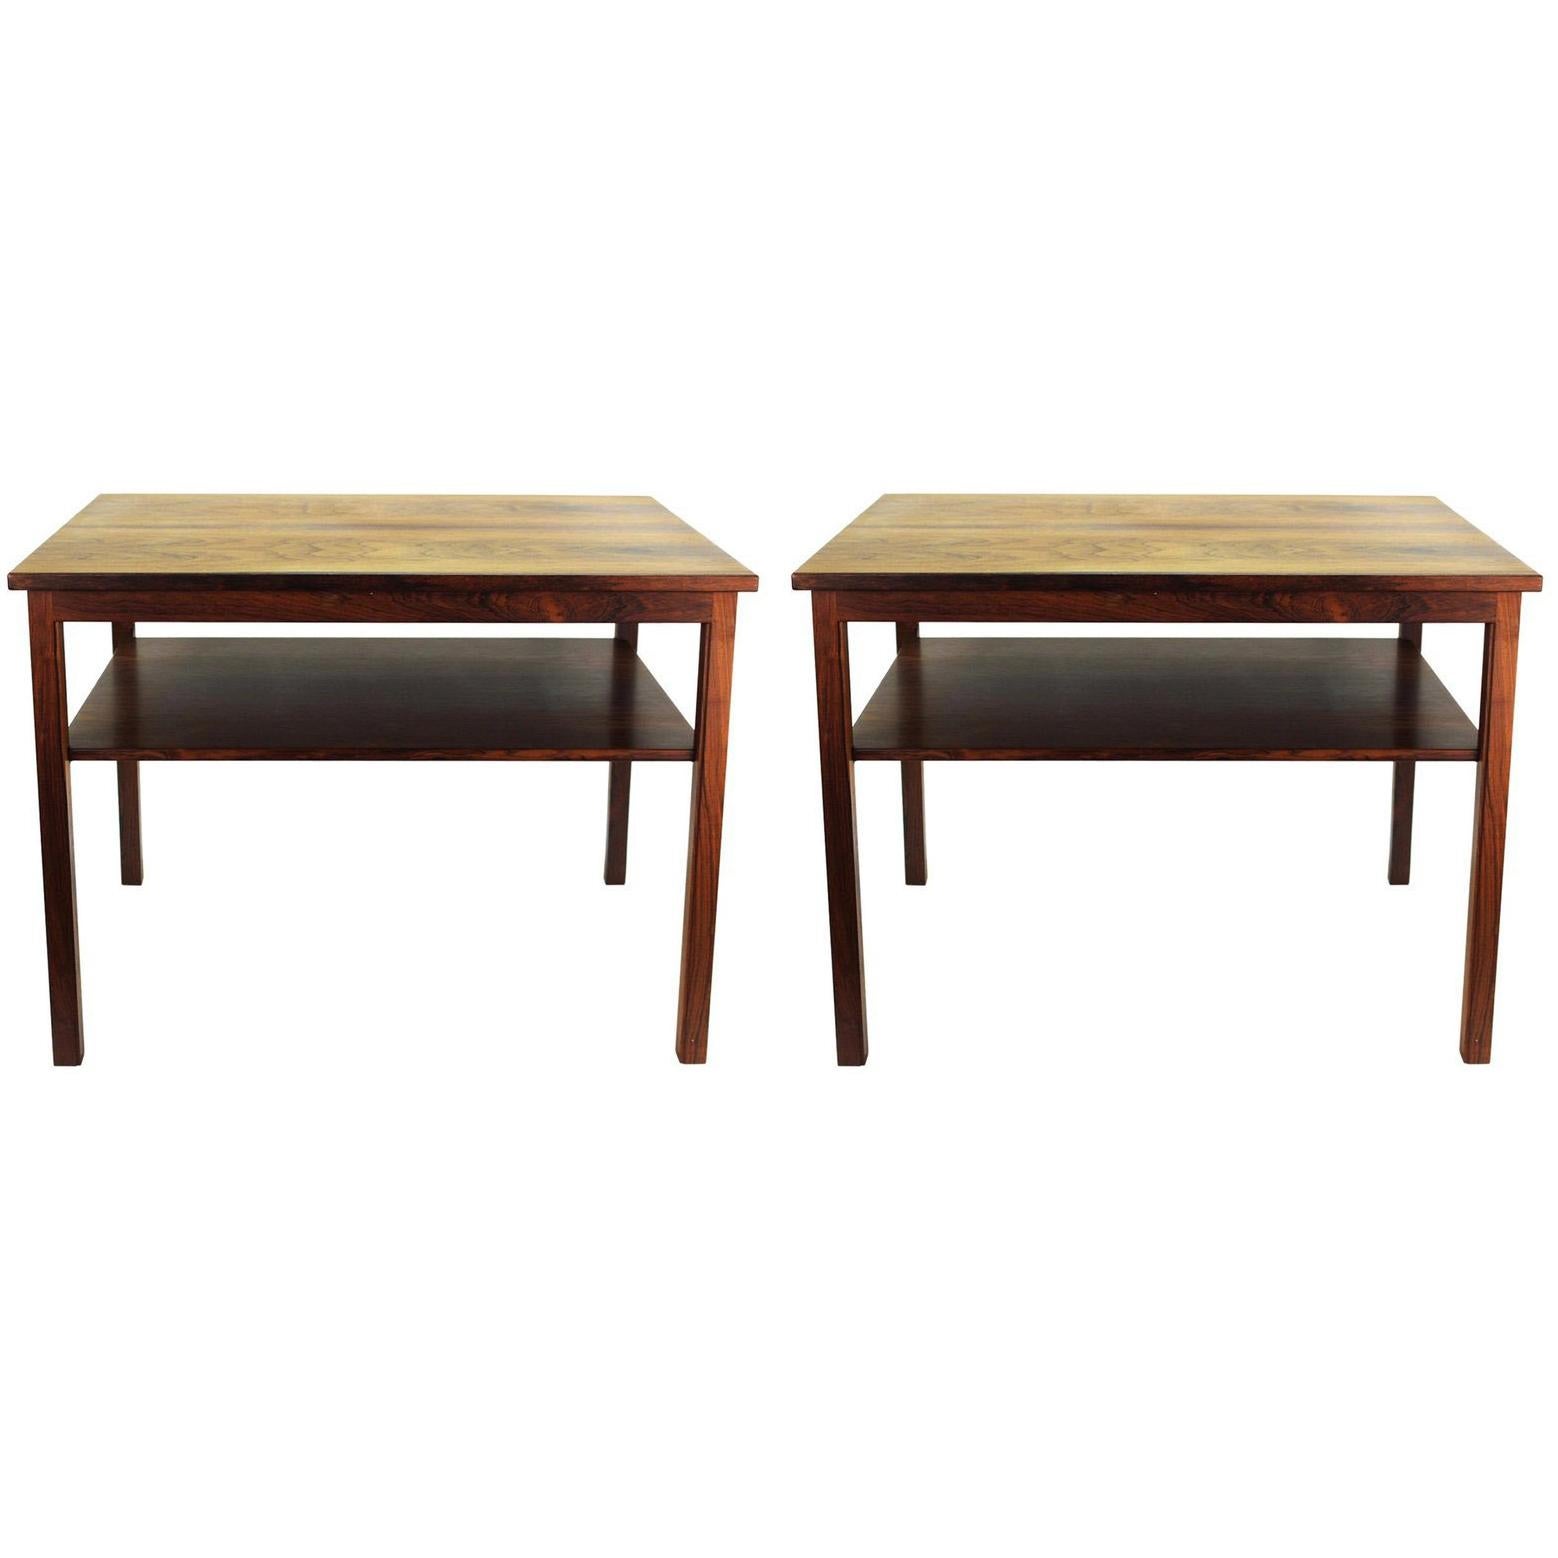 John Stuart Mid-Century Modern Side Tables with Two Levels